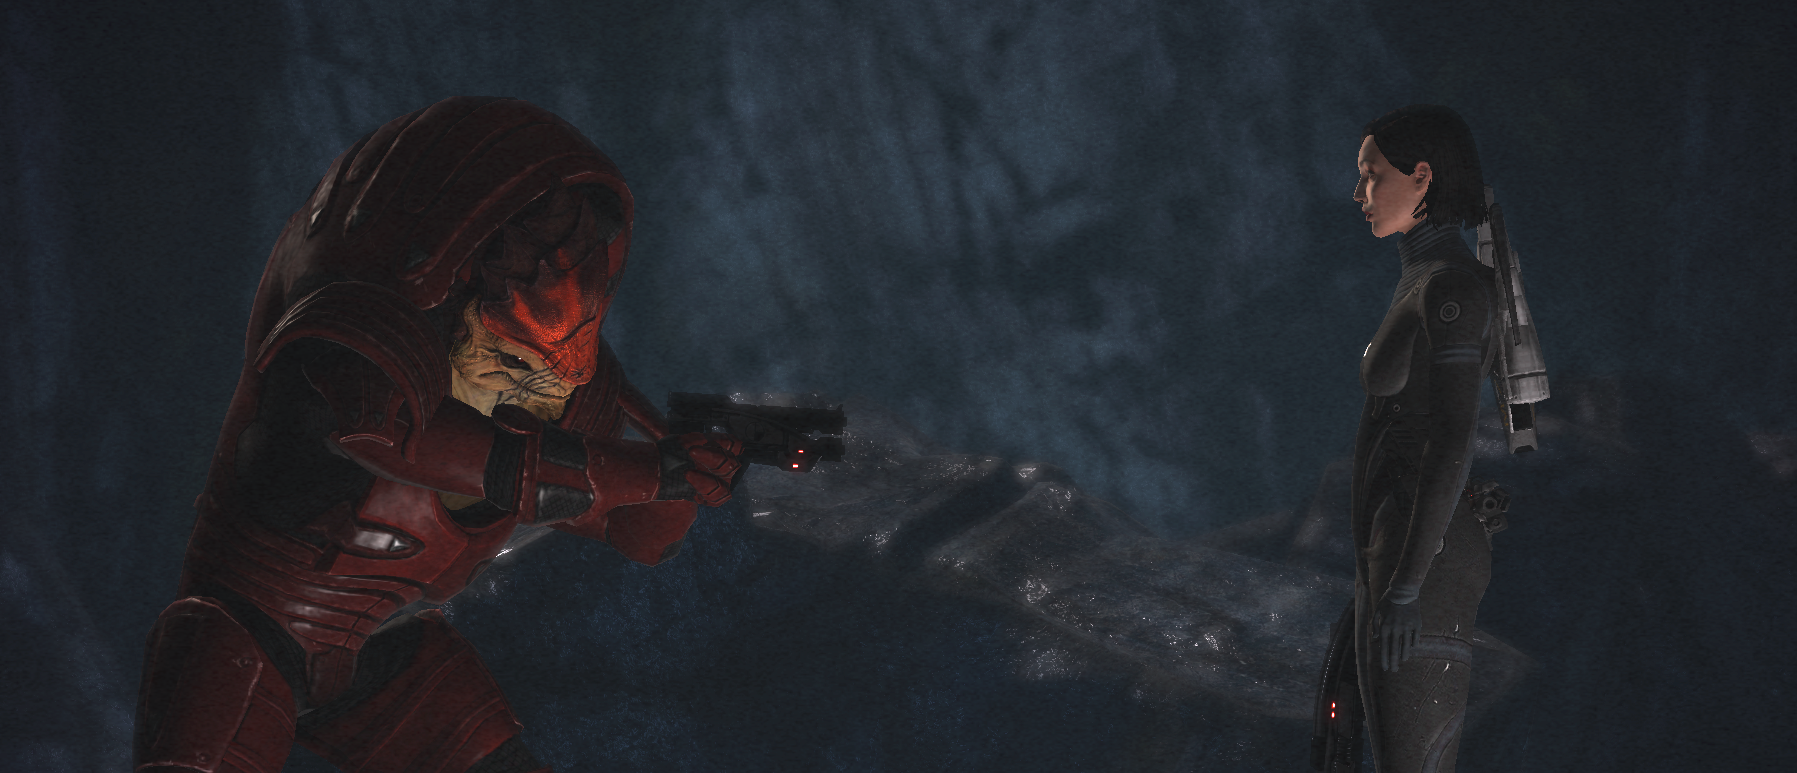 A sturdy krogan (alien) in red armour threatens to shoot a woman to the right in black armour.